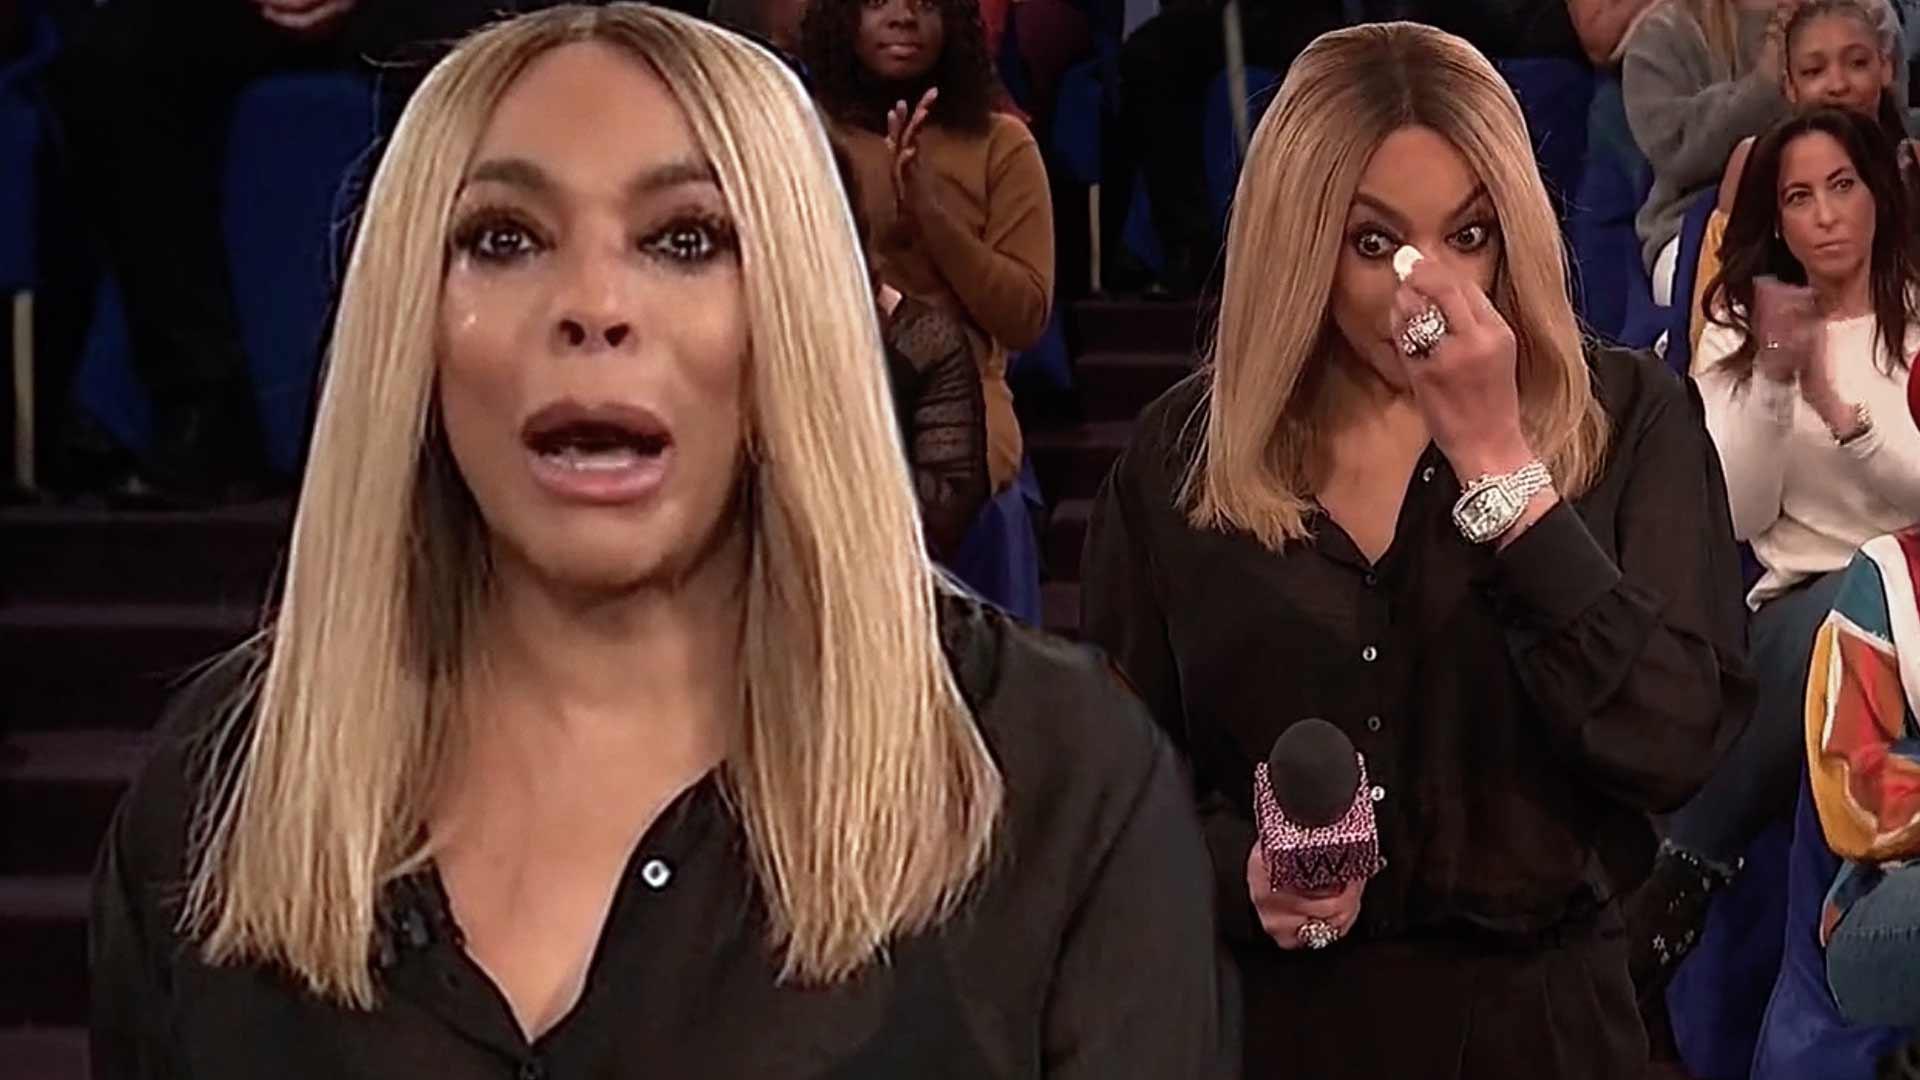 Wendy Williams Reveals She’s in Treatment for Addiction, Living in a Sober House